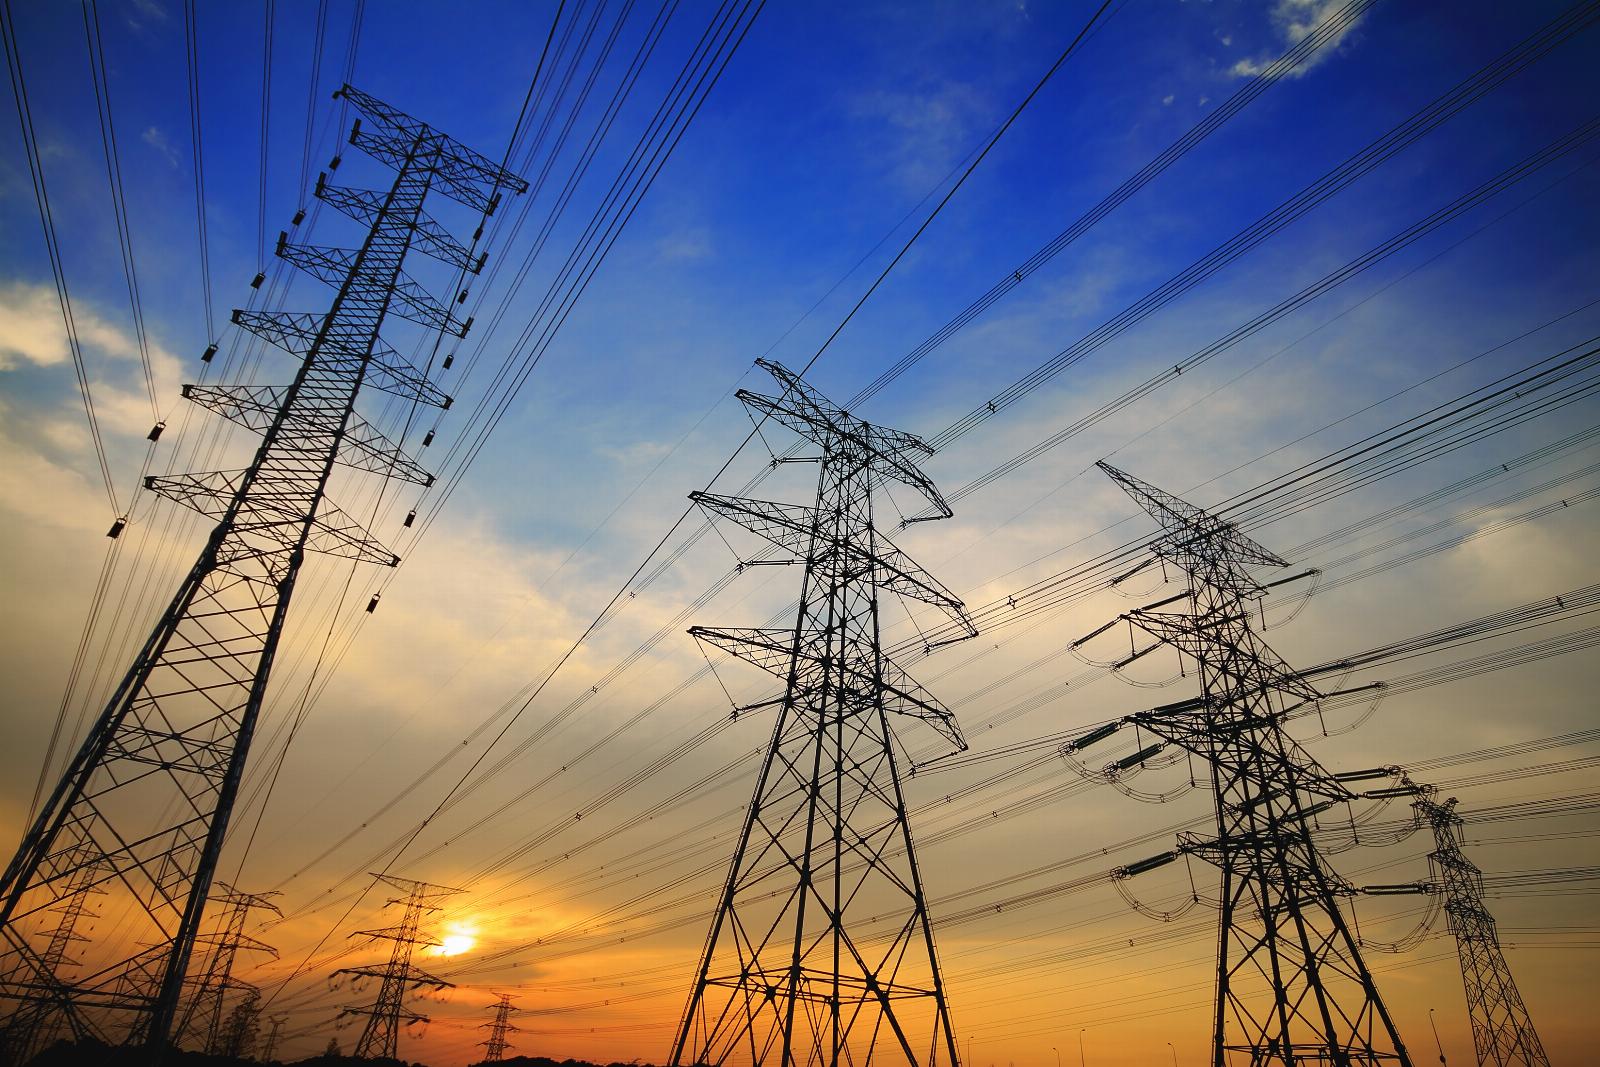 Researchers uncover Russia-linked malware that could immobilize electric grids